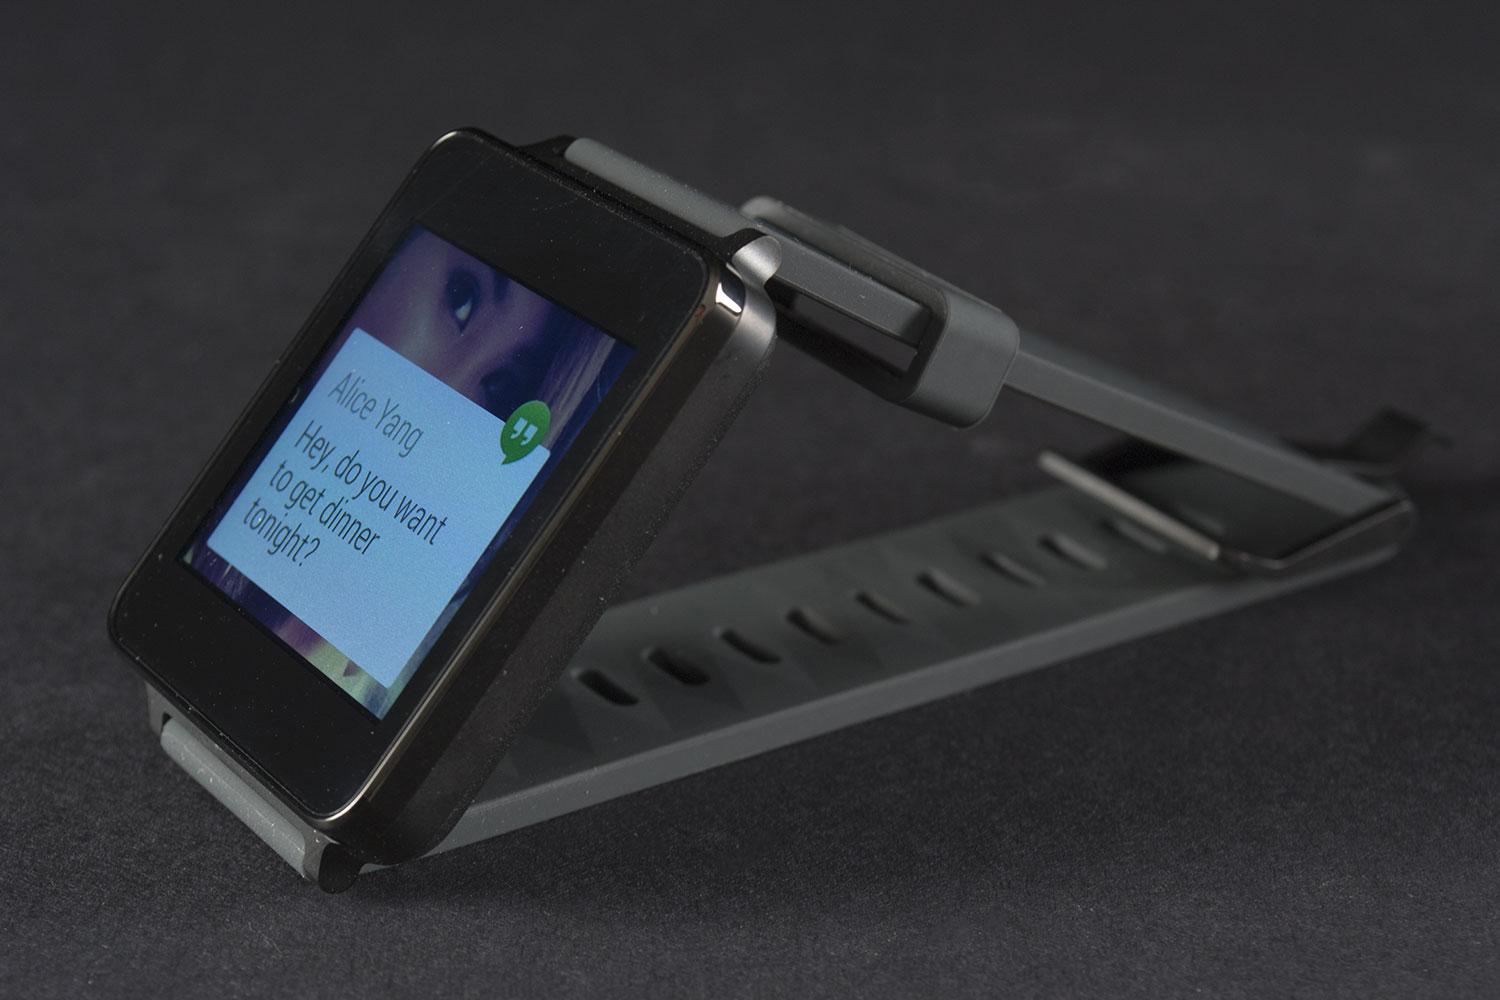 LG G Watch Review: It's Ugly, But Android Wear Works